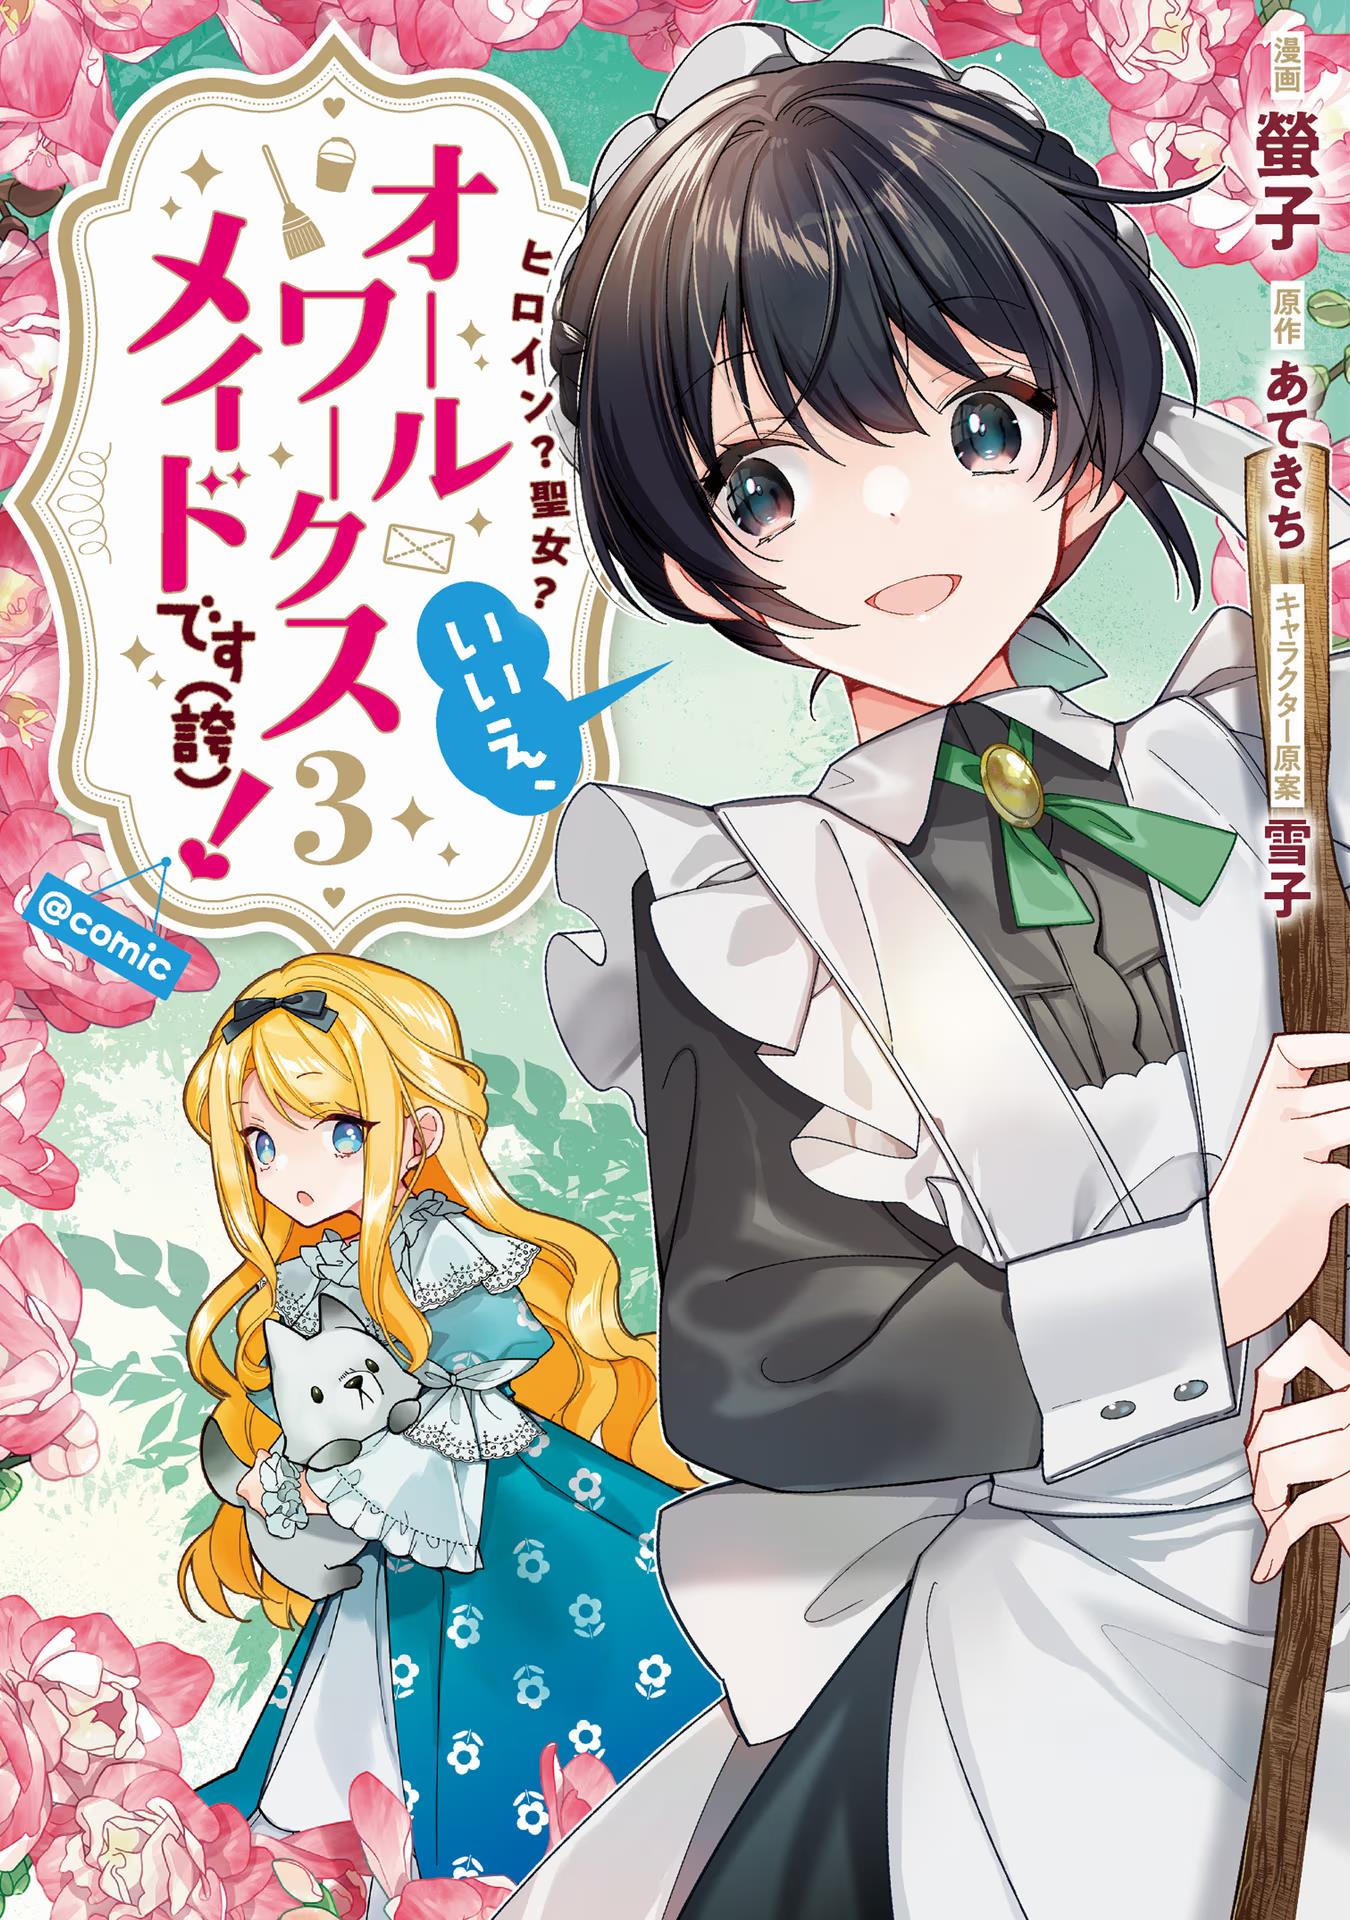 Heroine? Saint? No, I'm An All-Works Maid - chapter 11 - #1